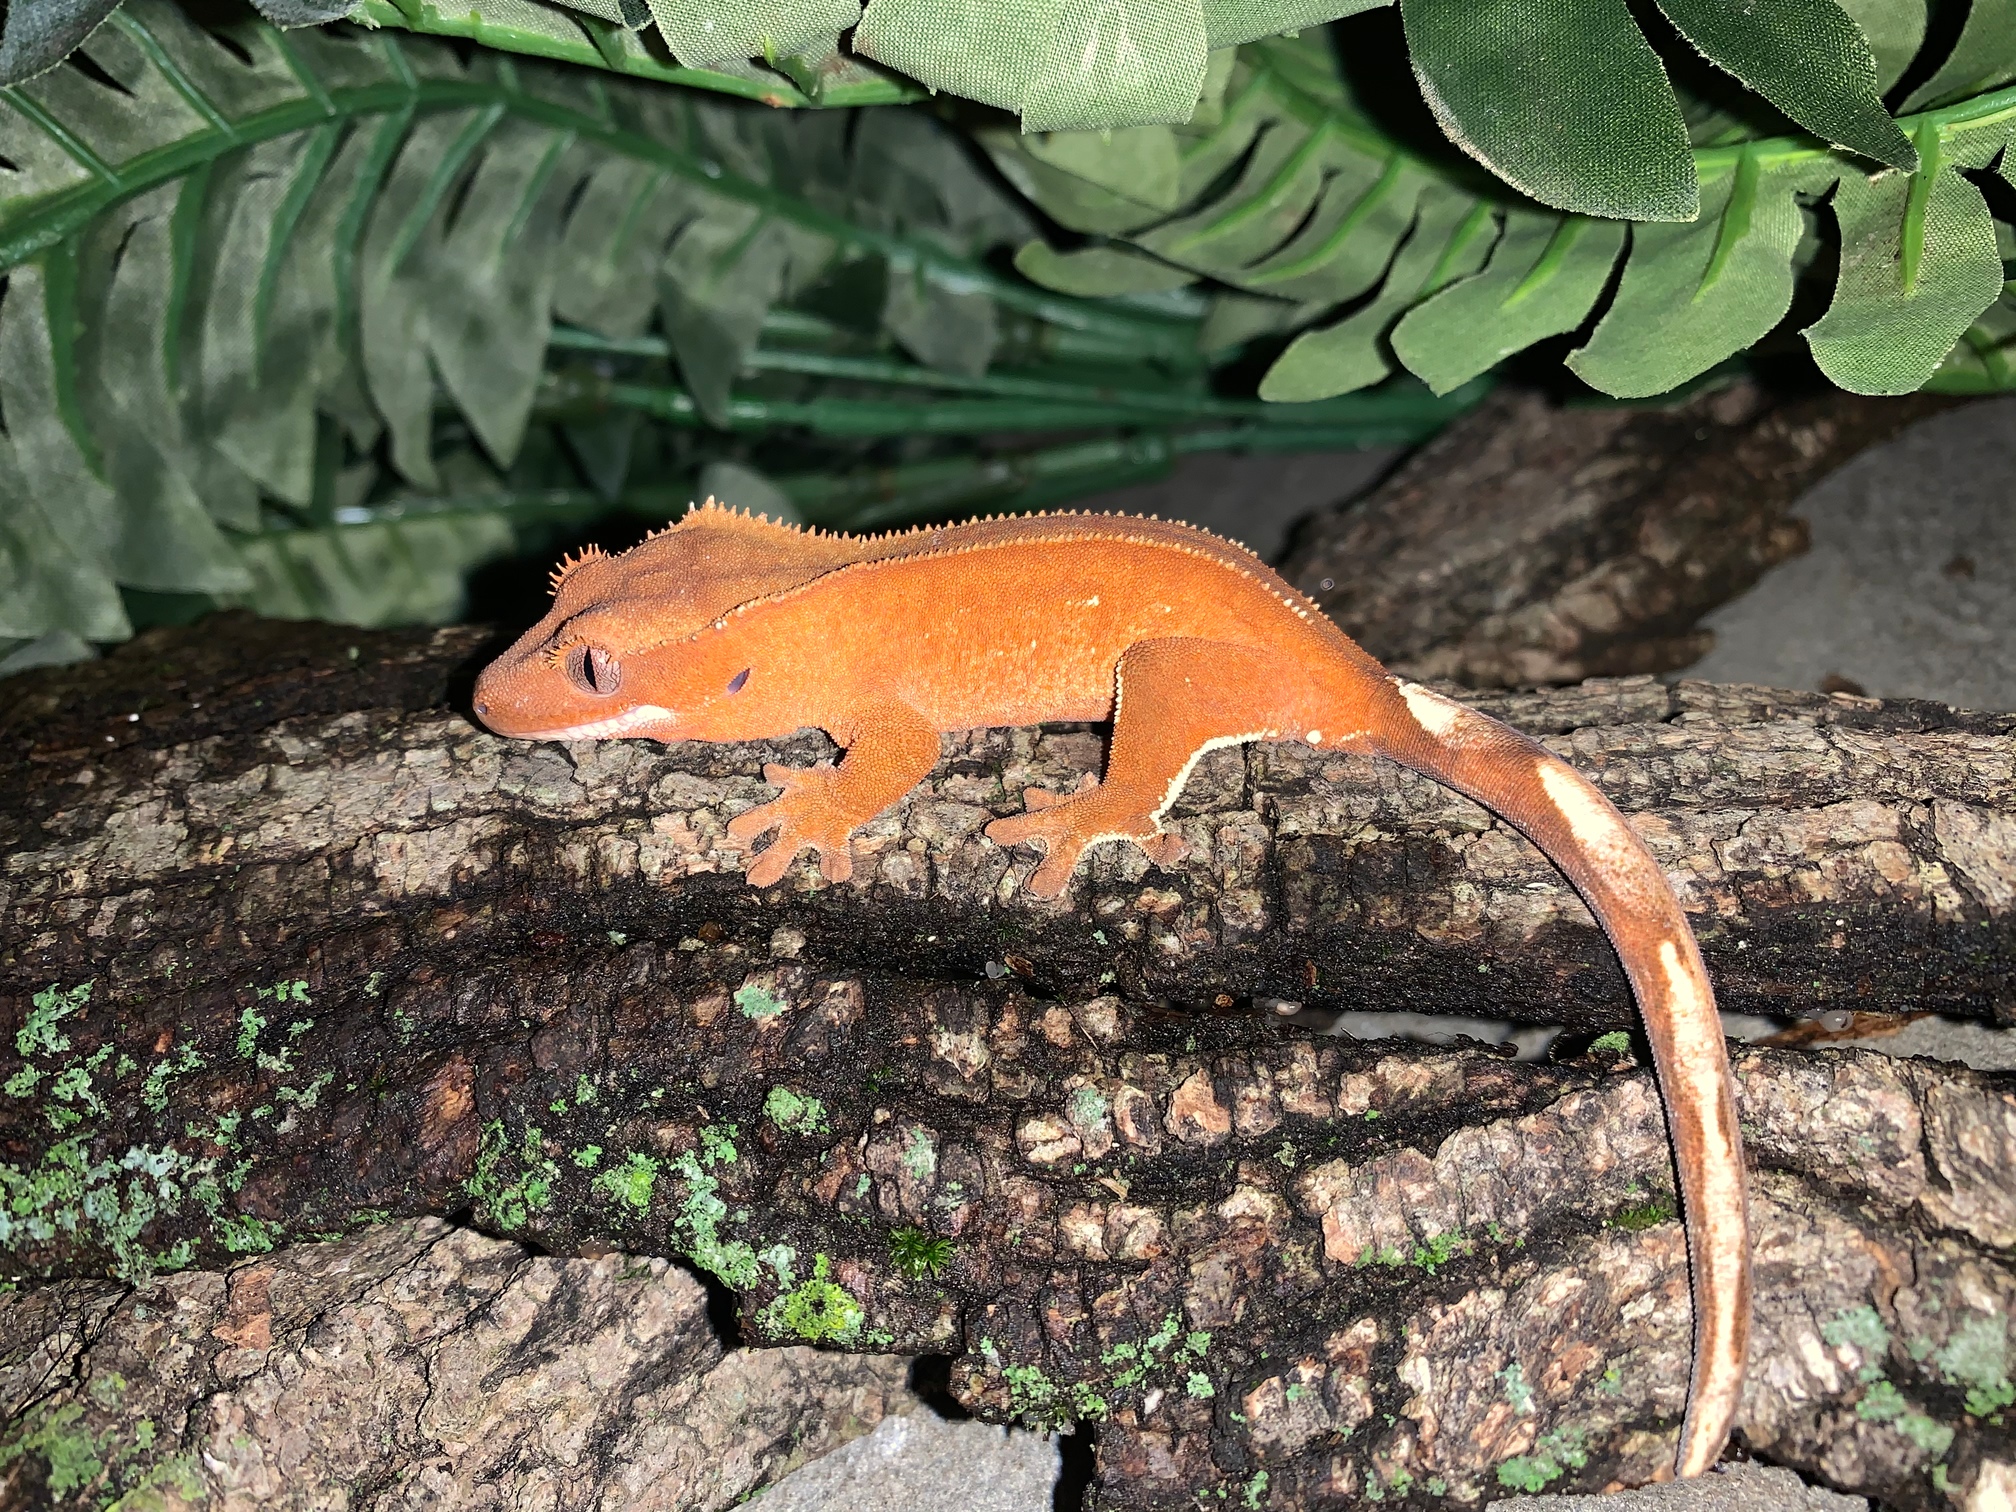 Red Crested Gecko by Taylor exotics